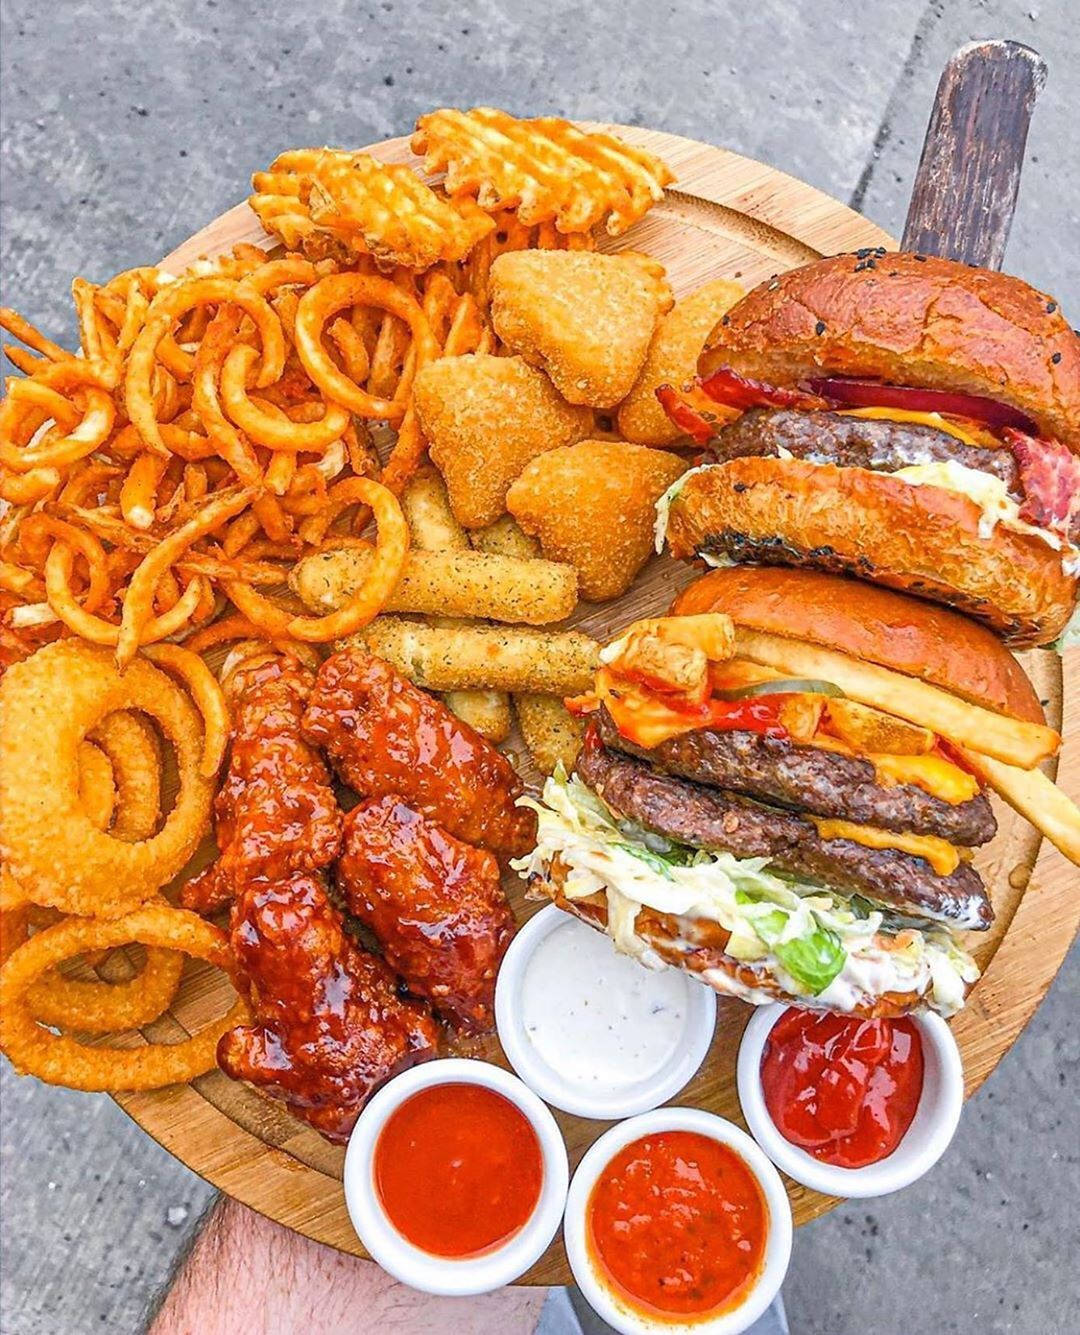 Tasty Burger, Wings, Nuggets, And Fries Wallpaper